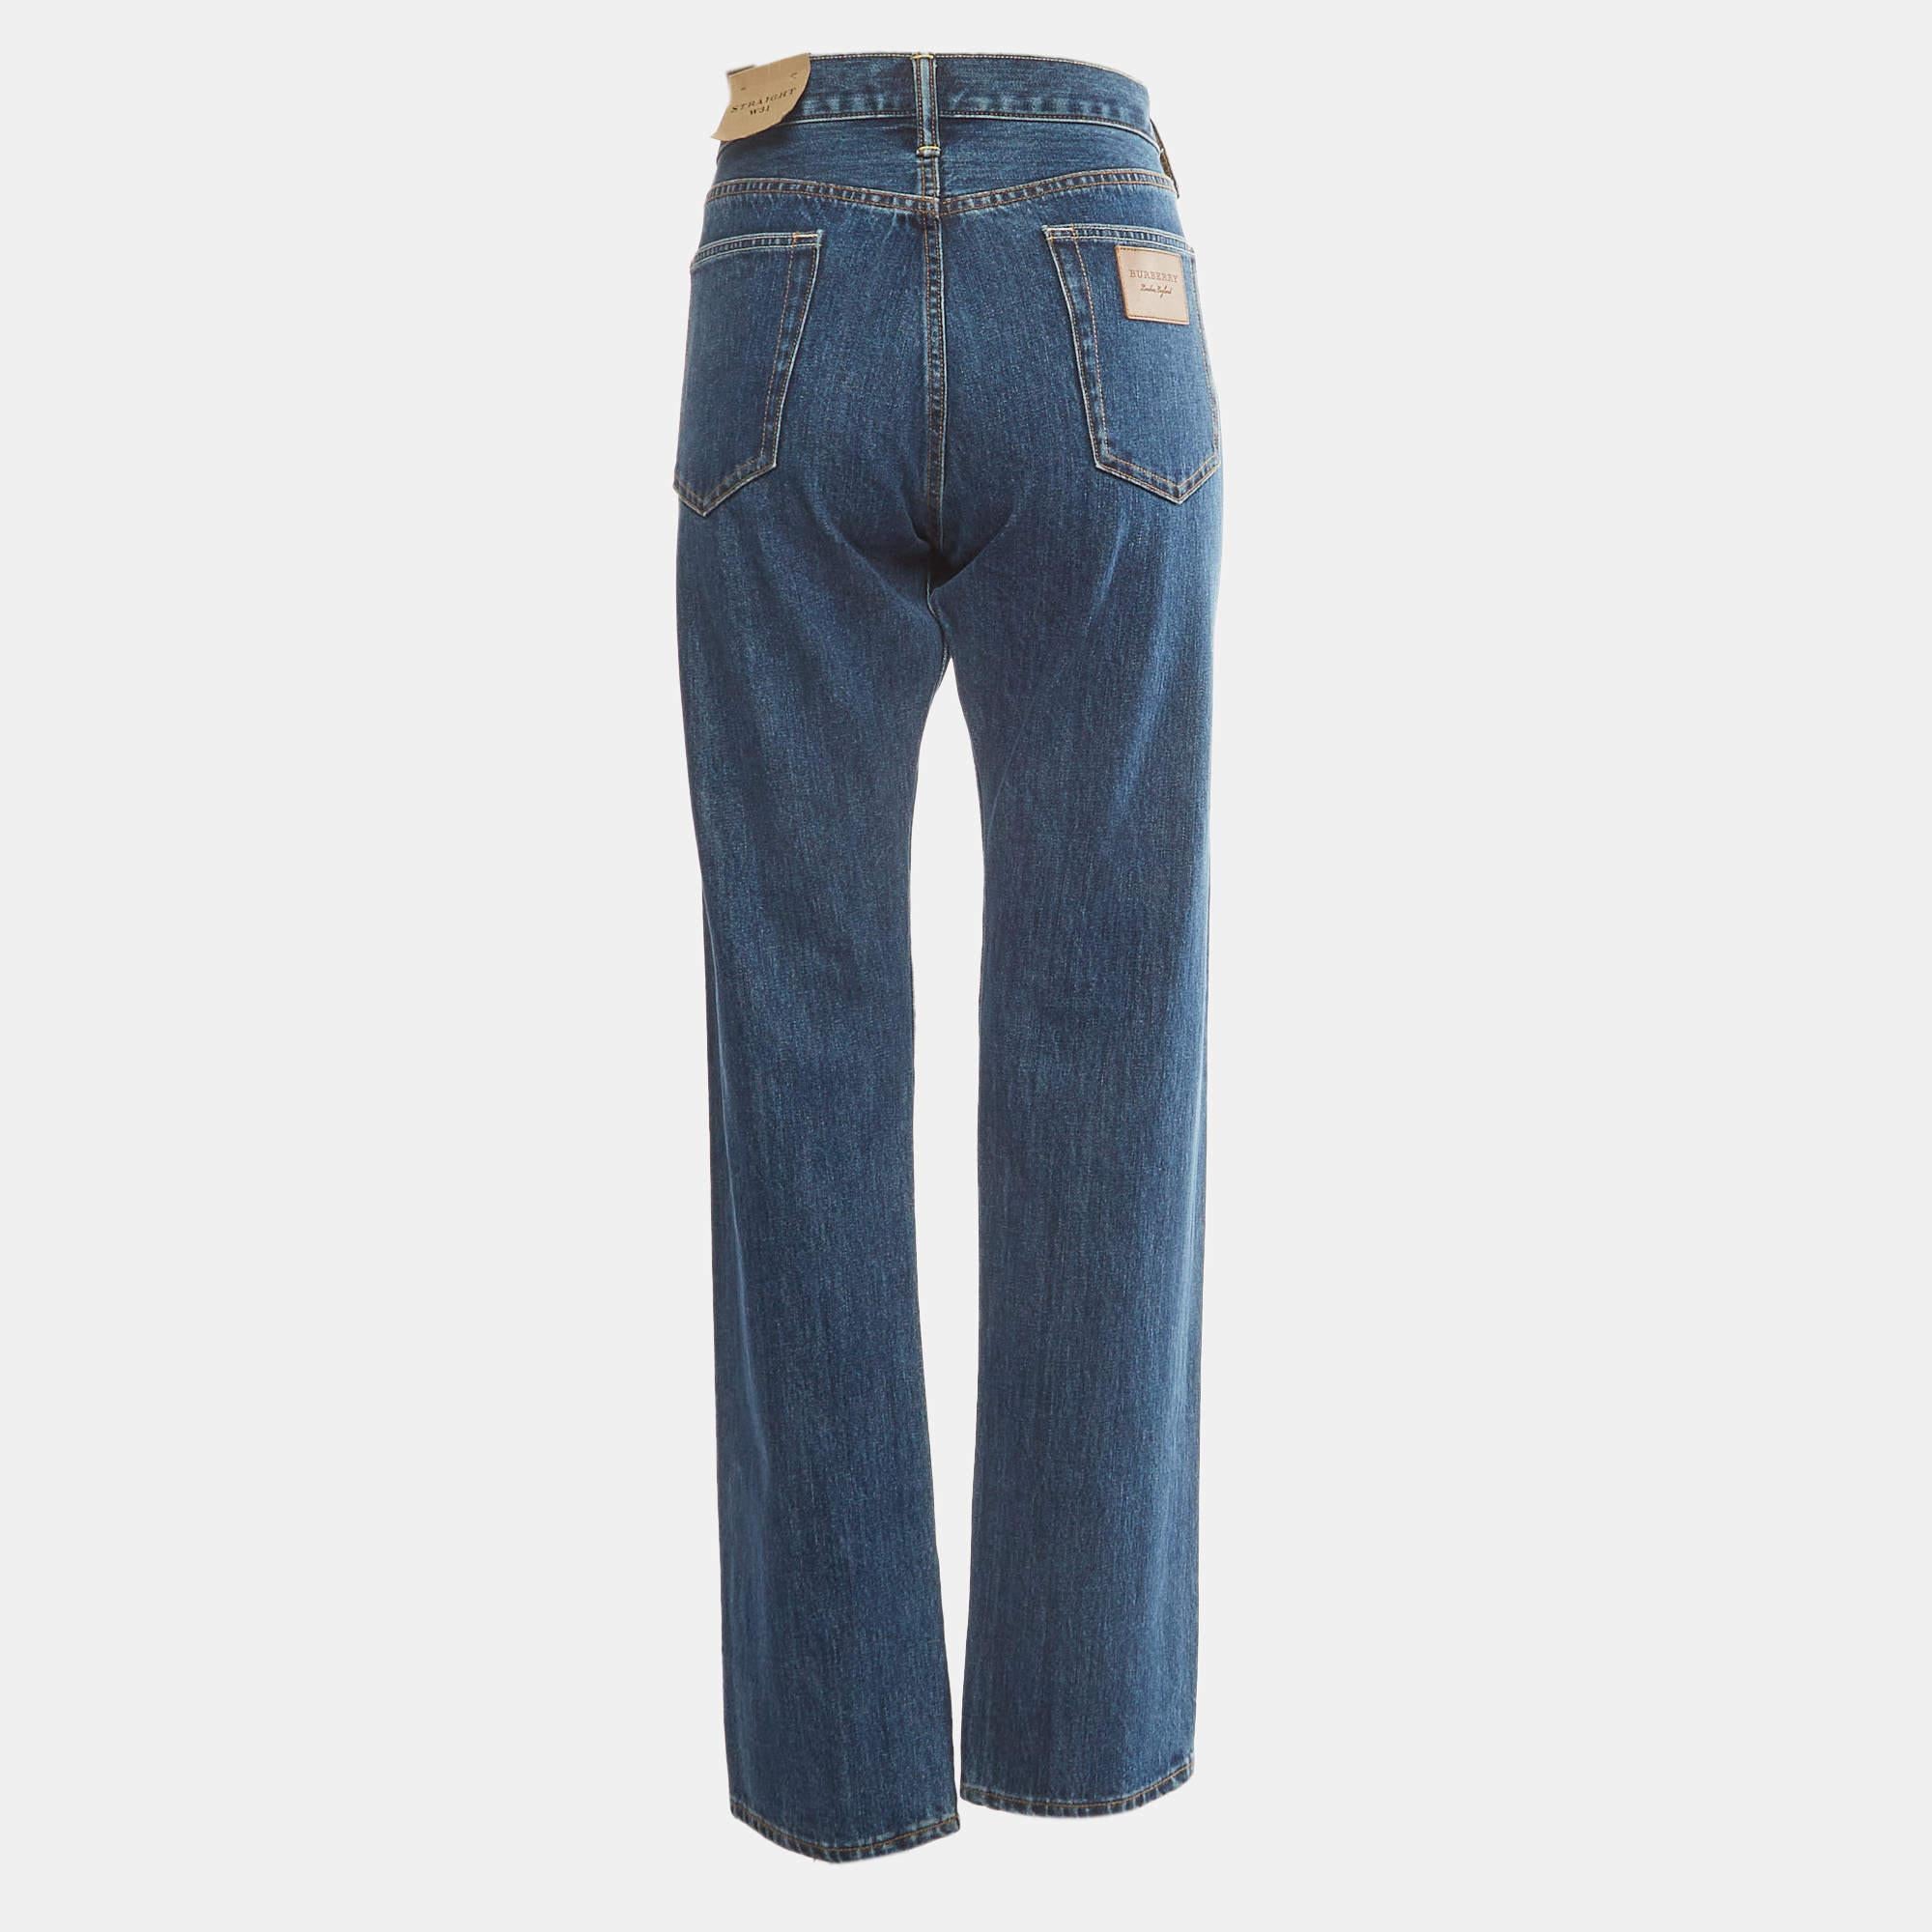 A good pair of jeans always makes the closet complete. This pair of jeans is tailored with such skill and style that it will be your favorite in no time. It will give you a comfortable, stylish fit.

Includes: Brand Tag, Price Tag